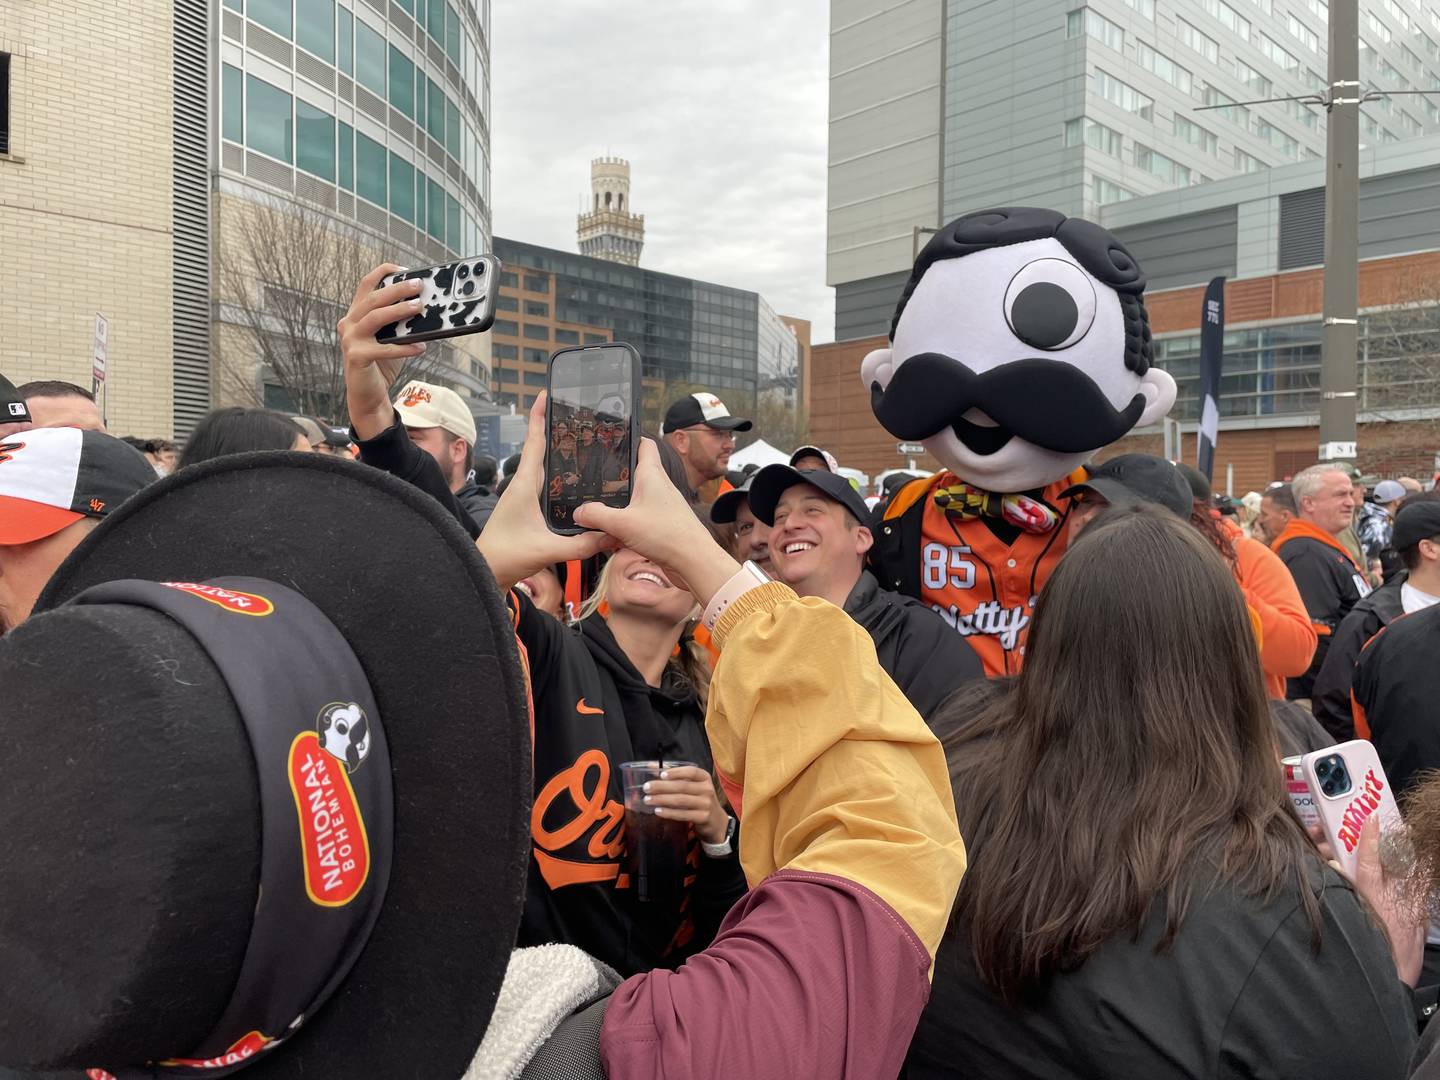 Mr. Boh made his way to Camden Yards-area pubs for Opening Day as Natty Boh is available at the stadium for the first time in years.